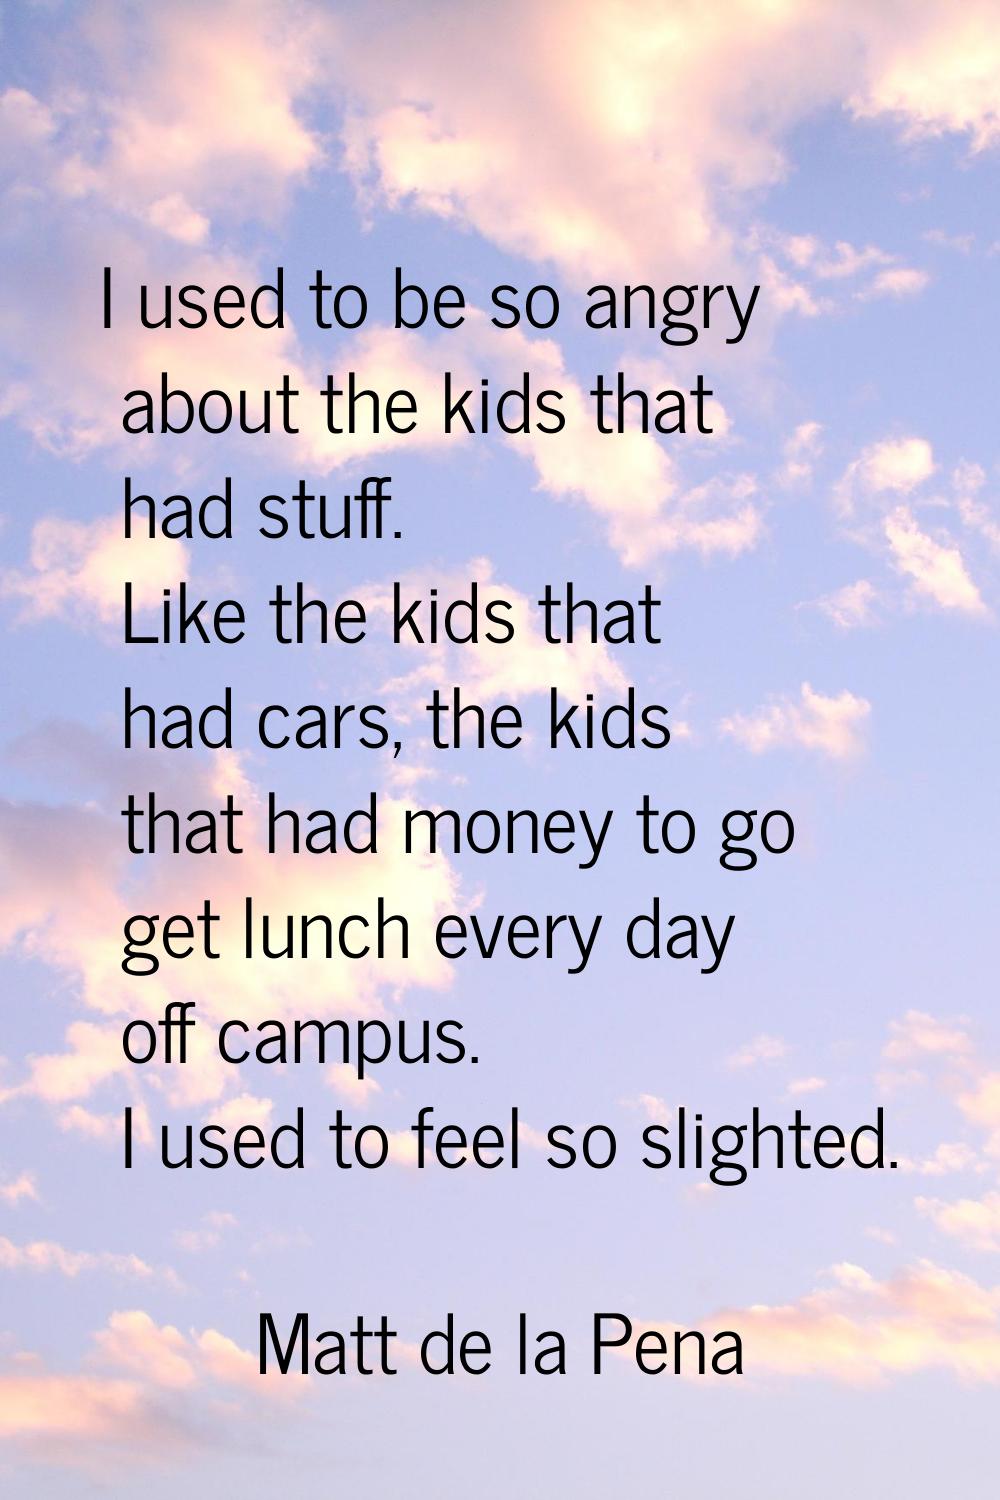 I used to be so angry about the kids that had stuff. Like the kids that had cars, the kids that had